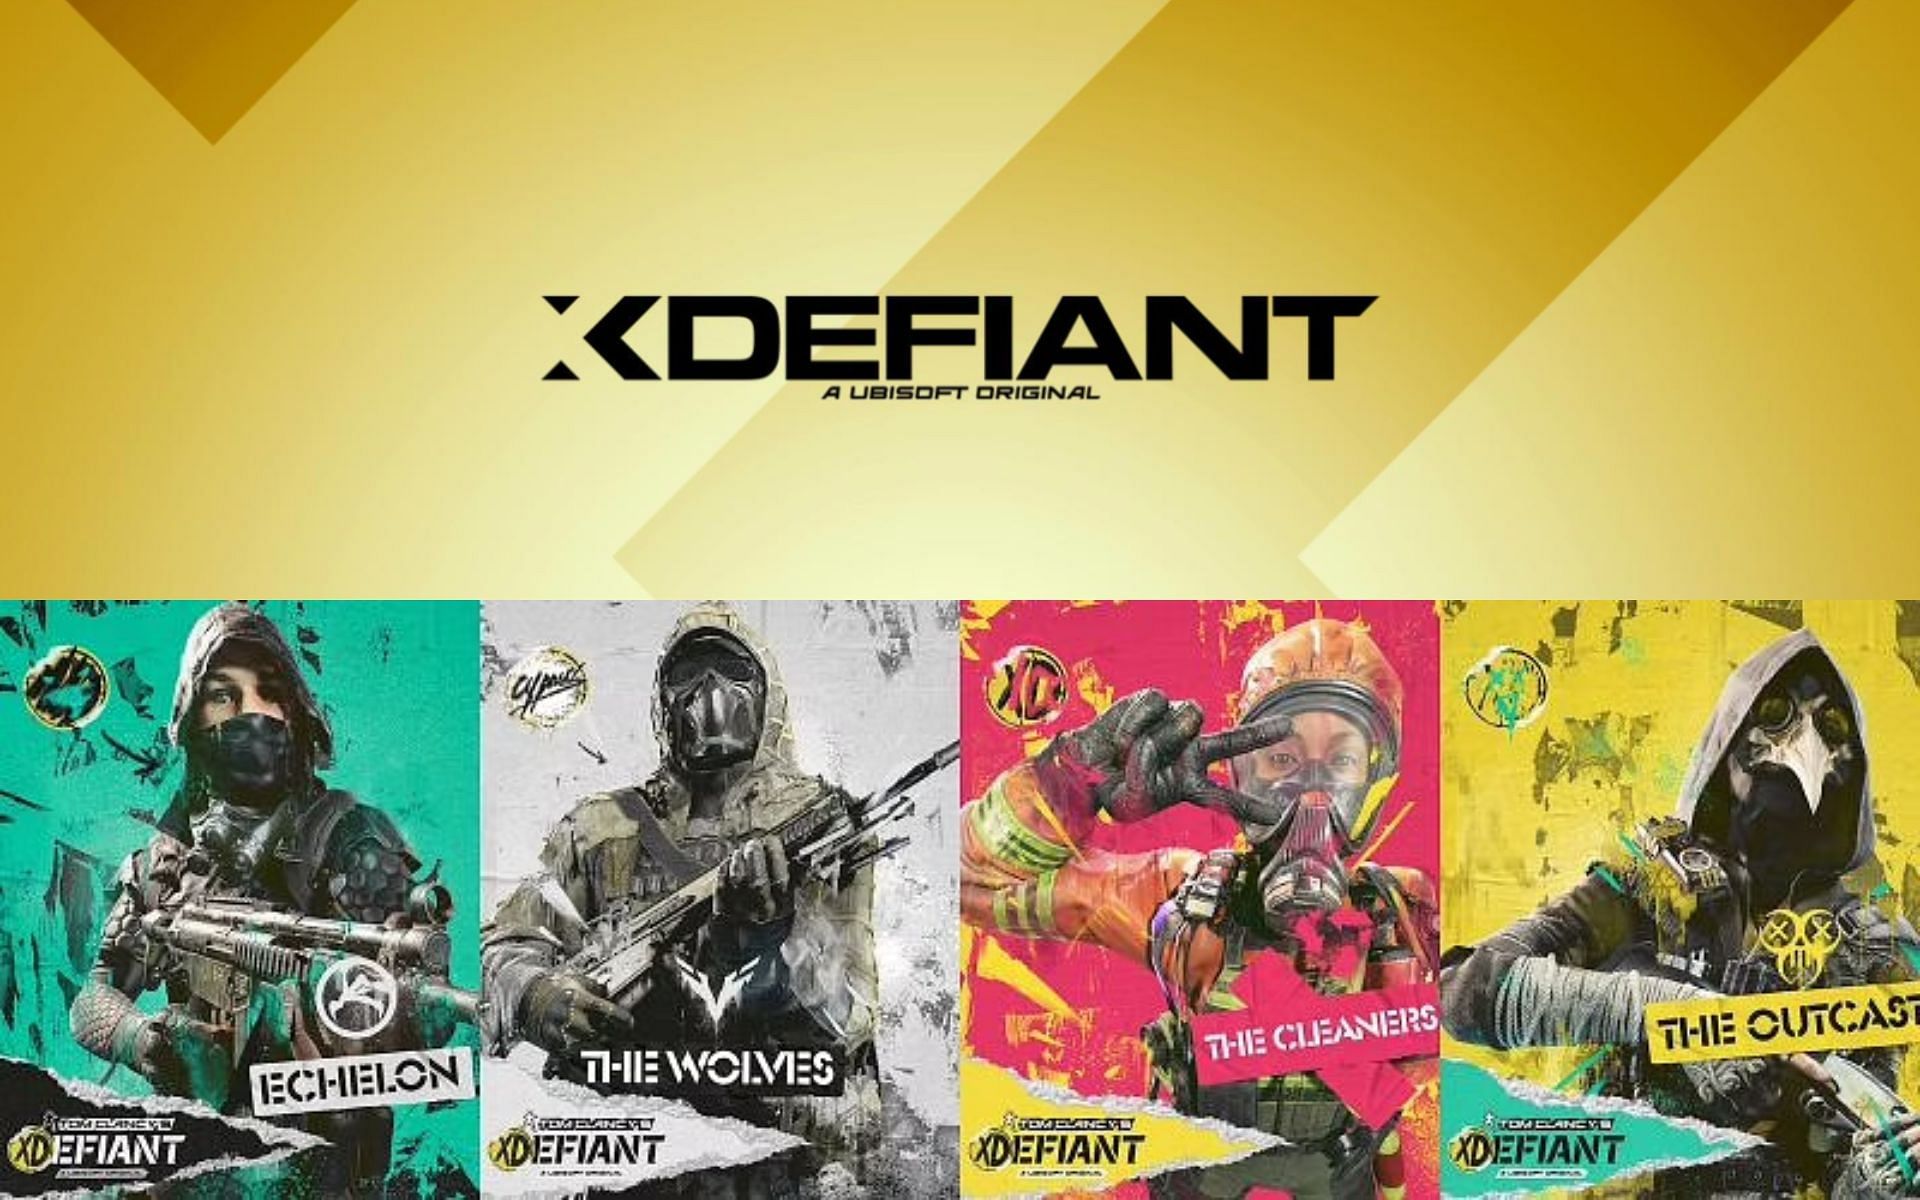 XDefiant brought together four factions from different Tom Clancy series (Images by Ubisoft)